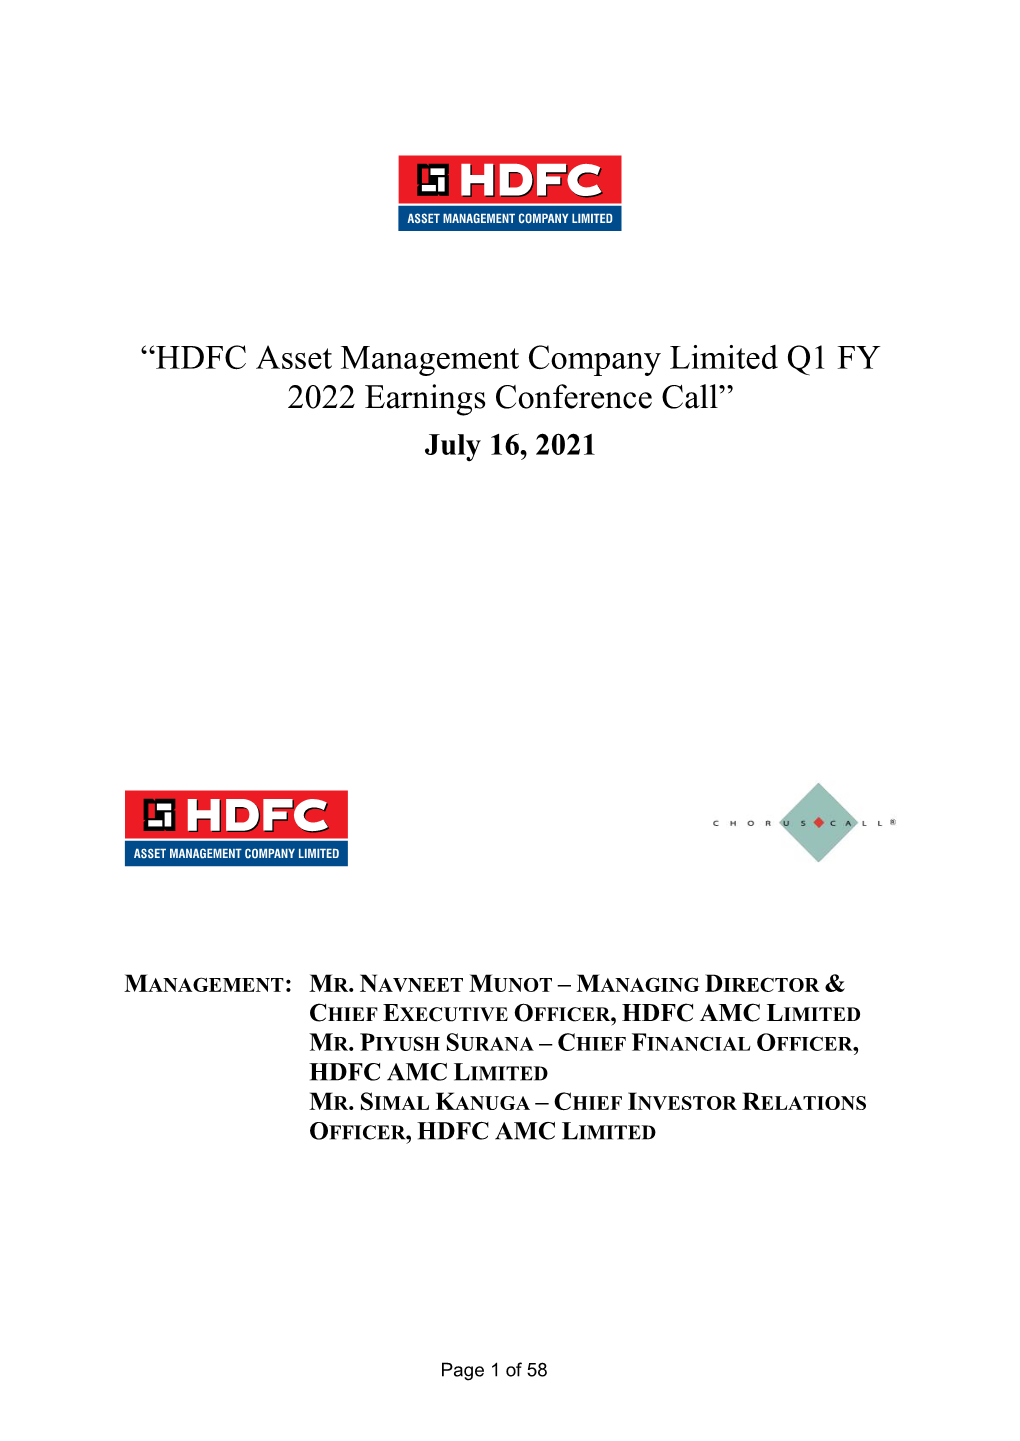 “HDFC Asset Management Company Limited Q1 FY 2022 Earnings Conference Call” July 16, 2021